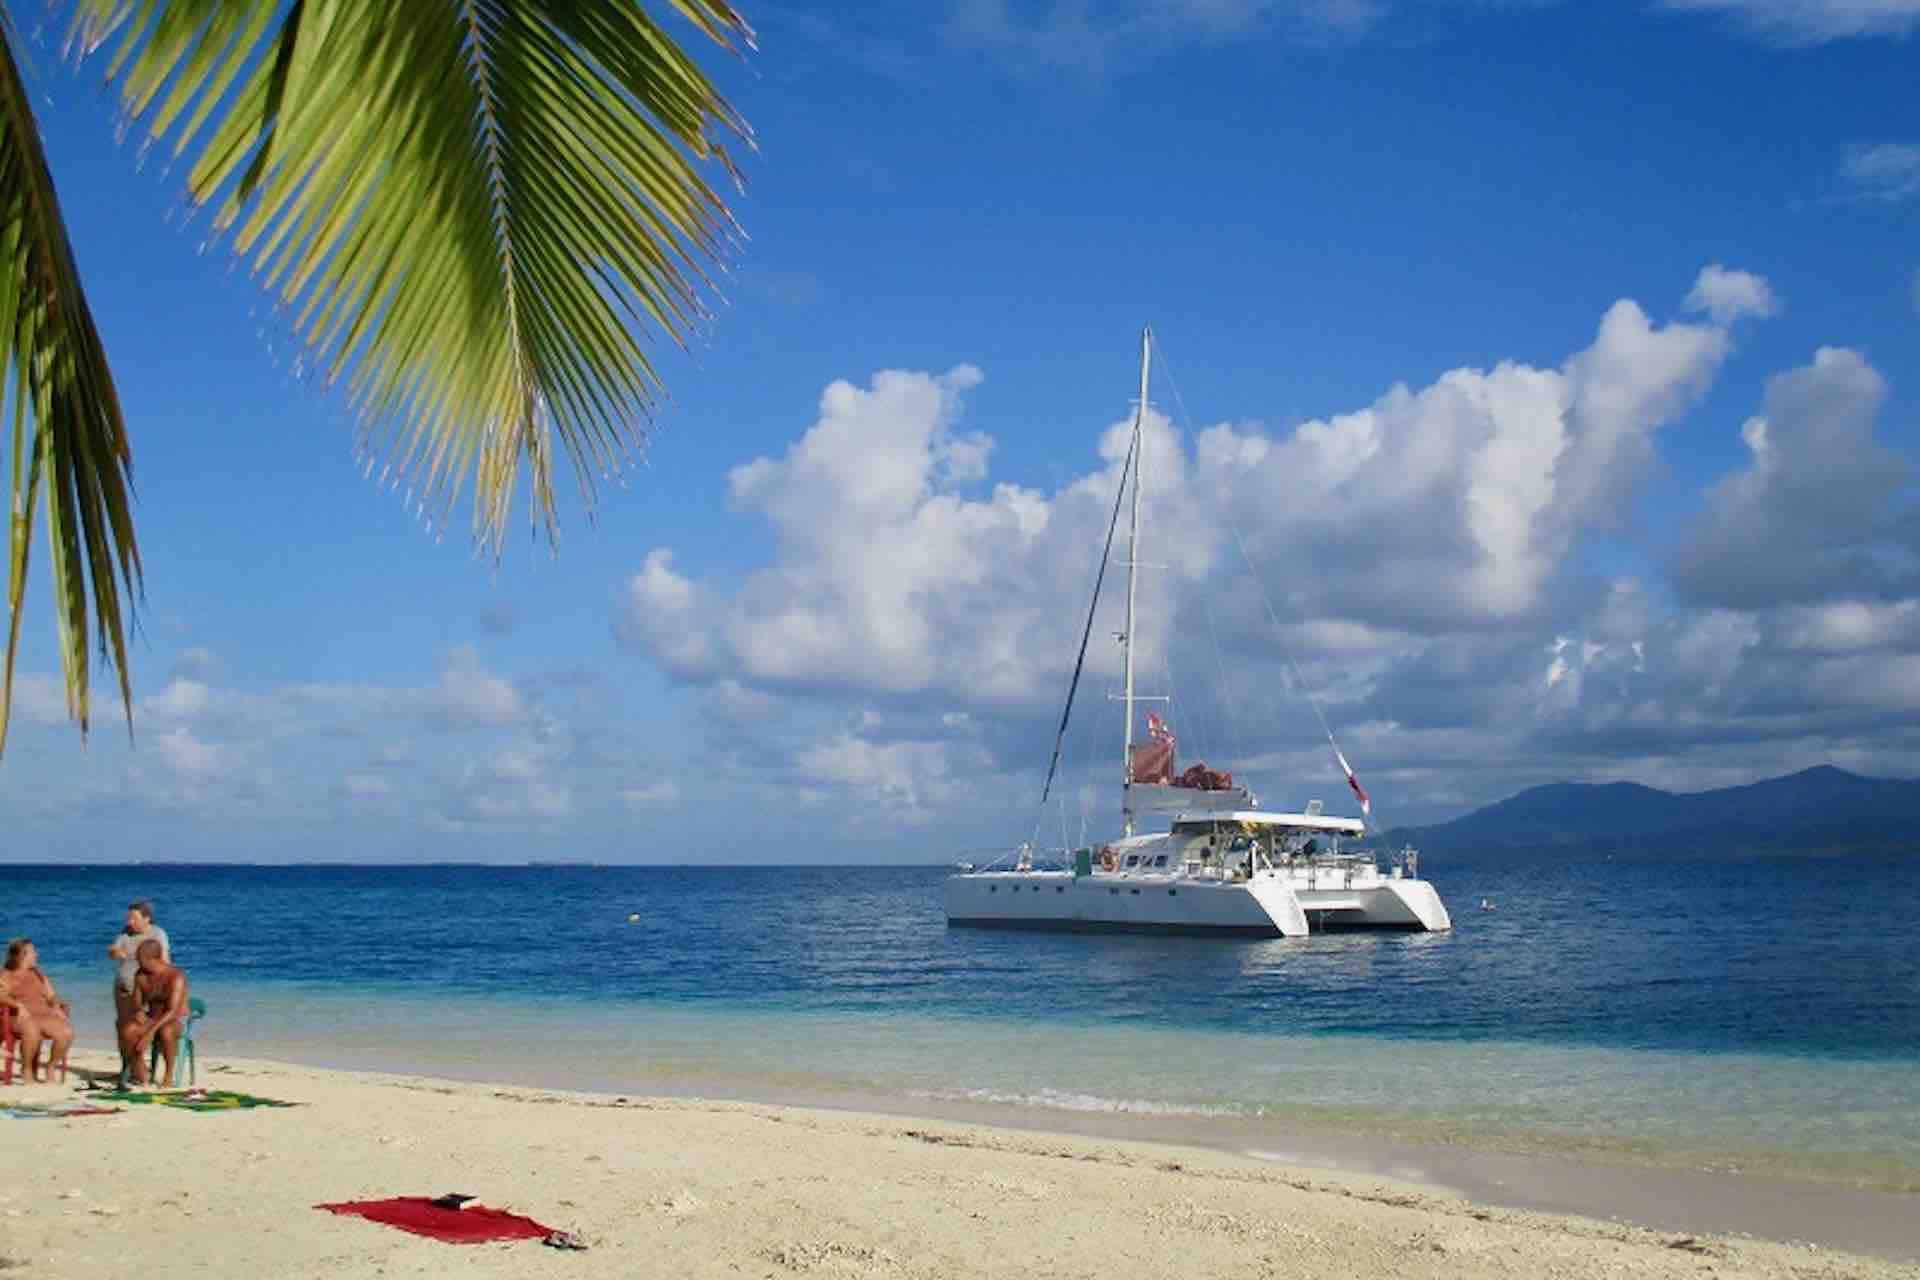 Taboga island catamaran anchored in front of beach with palm tree